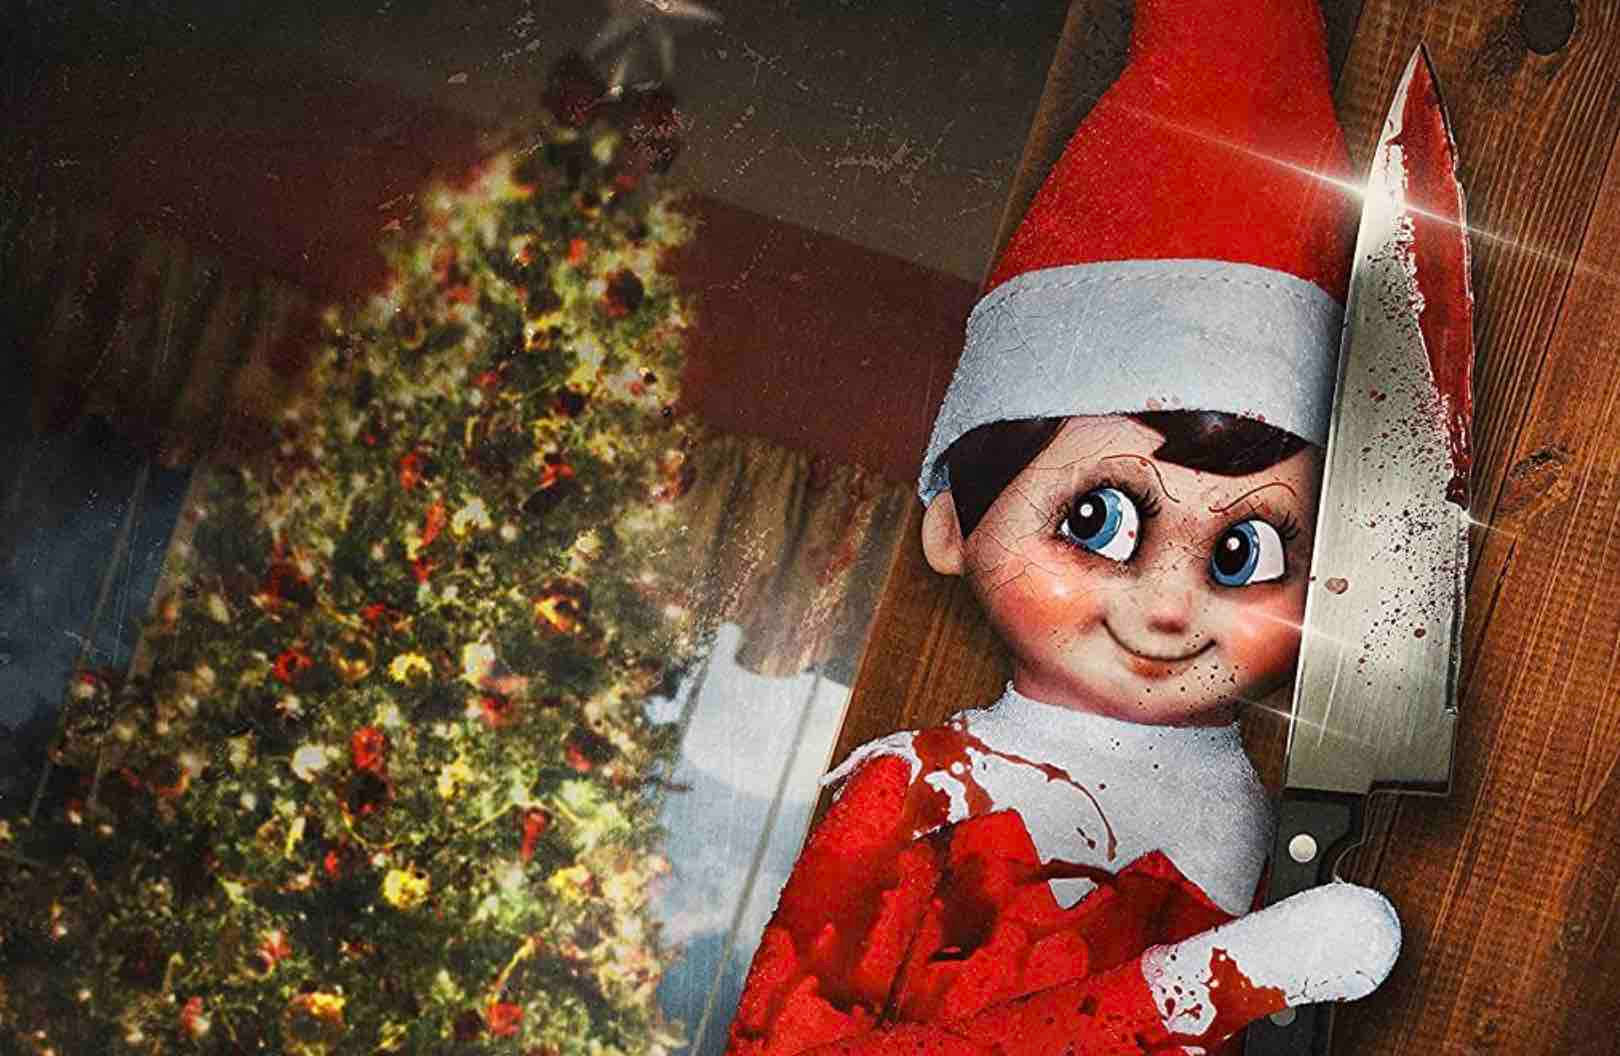 Scary Christmas With A Murderous Doll Wallpaper